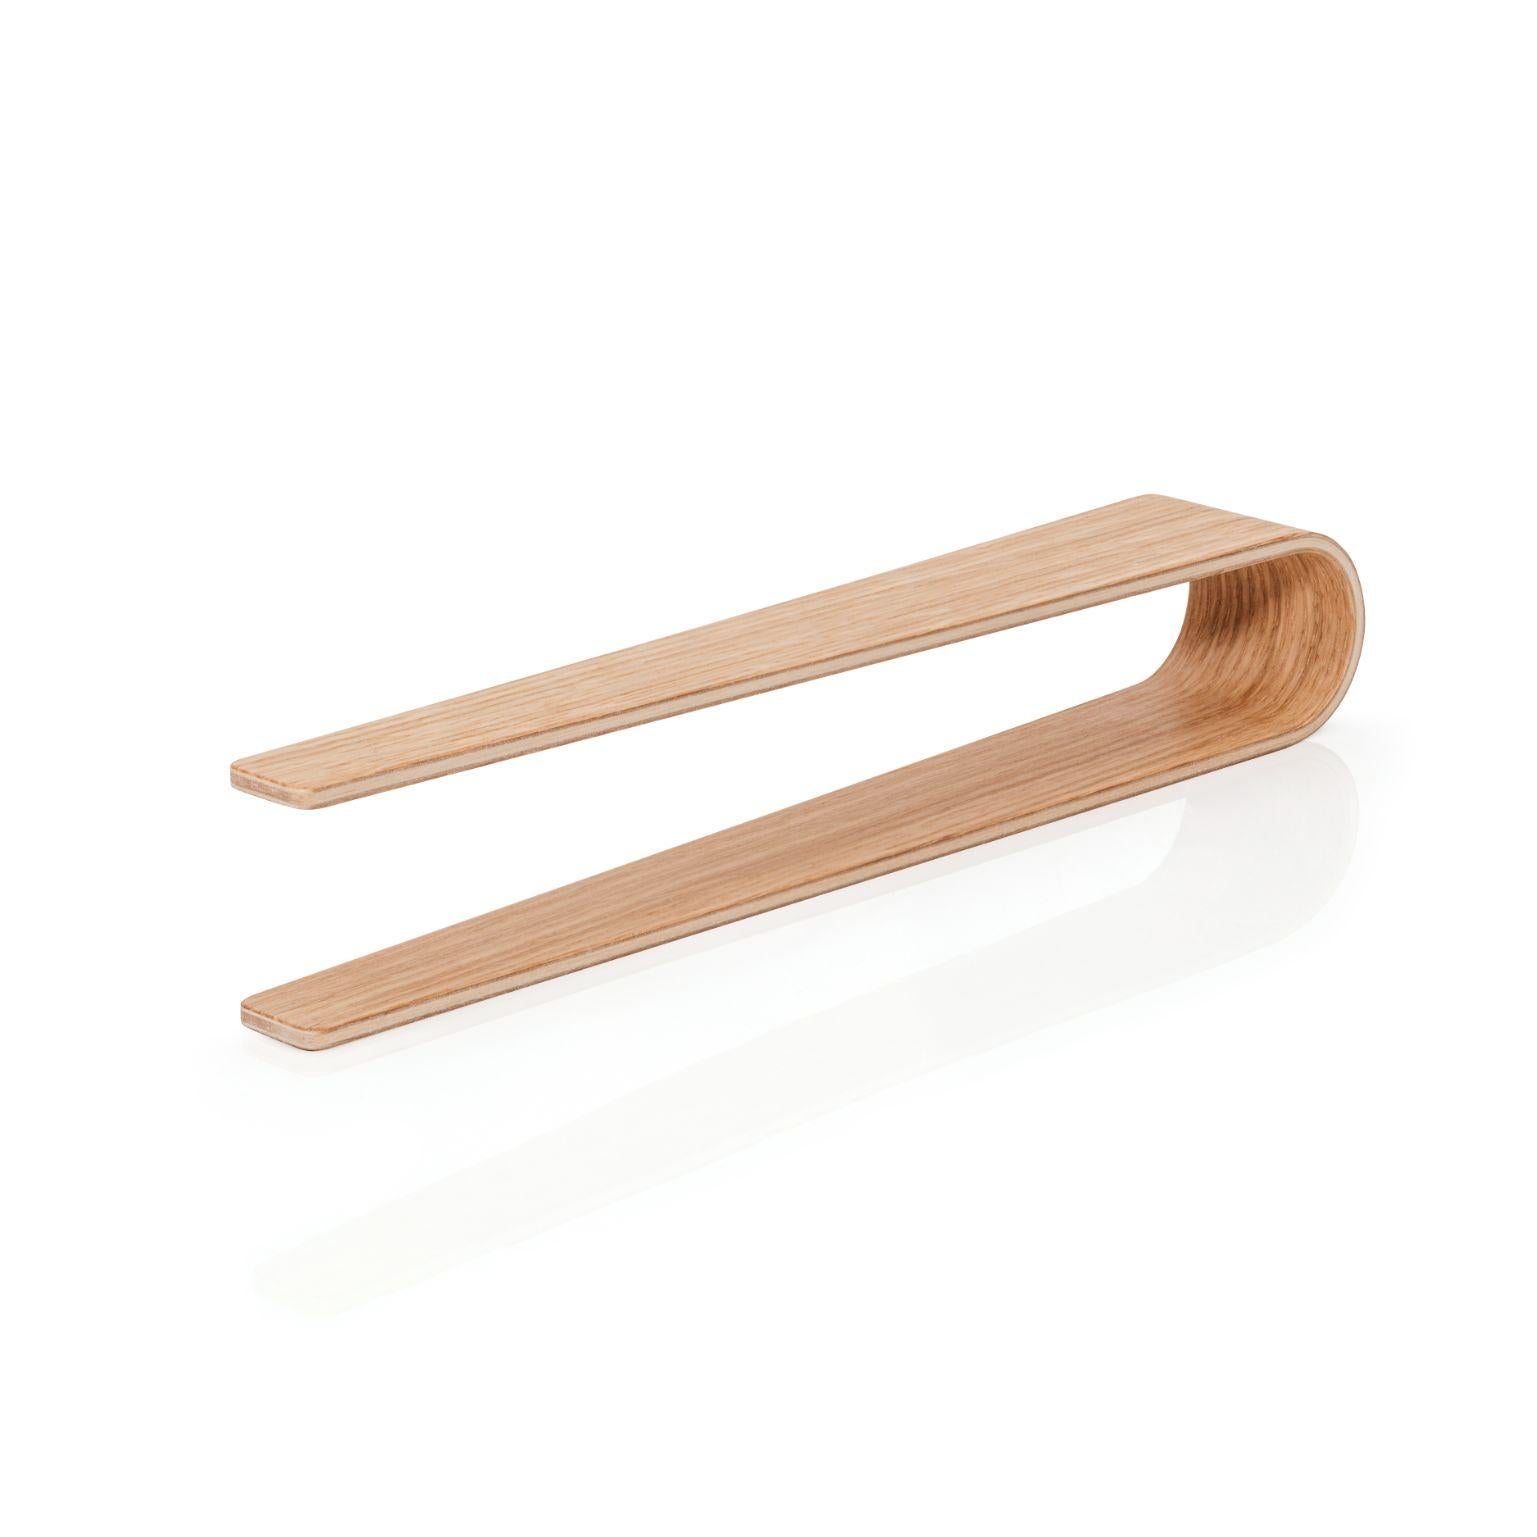 Nokka tongs - Oak by Antrei Hartikainen
Materials: Walnut, maple, natural oil wax
Dimensions: W 24,5 D 4/2 H 6 cm

Also available in a variety of woods

Nokka tongs are suitable for serving a range of light foods including appetizers, salads,